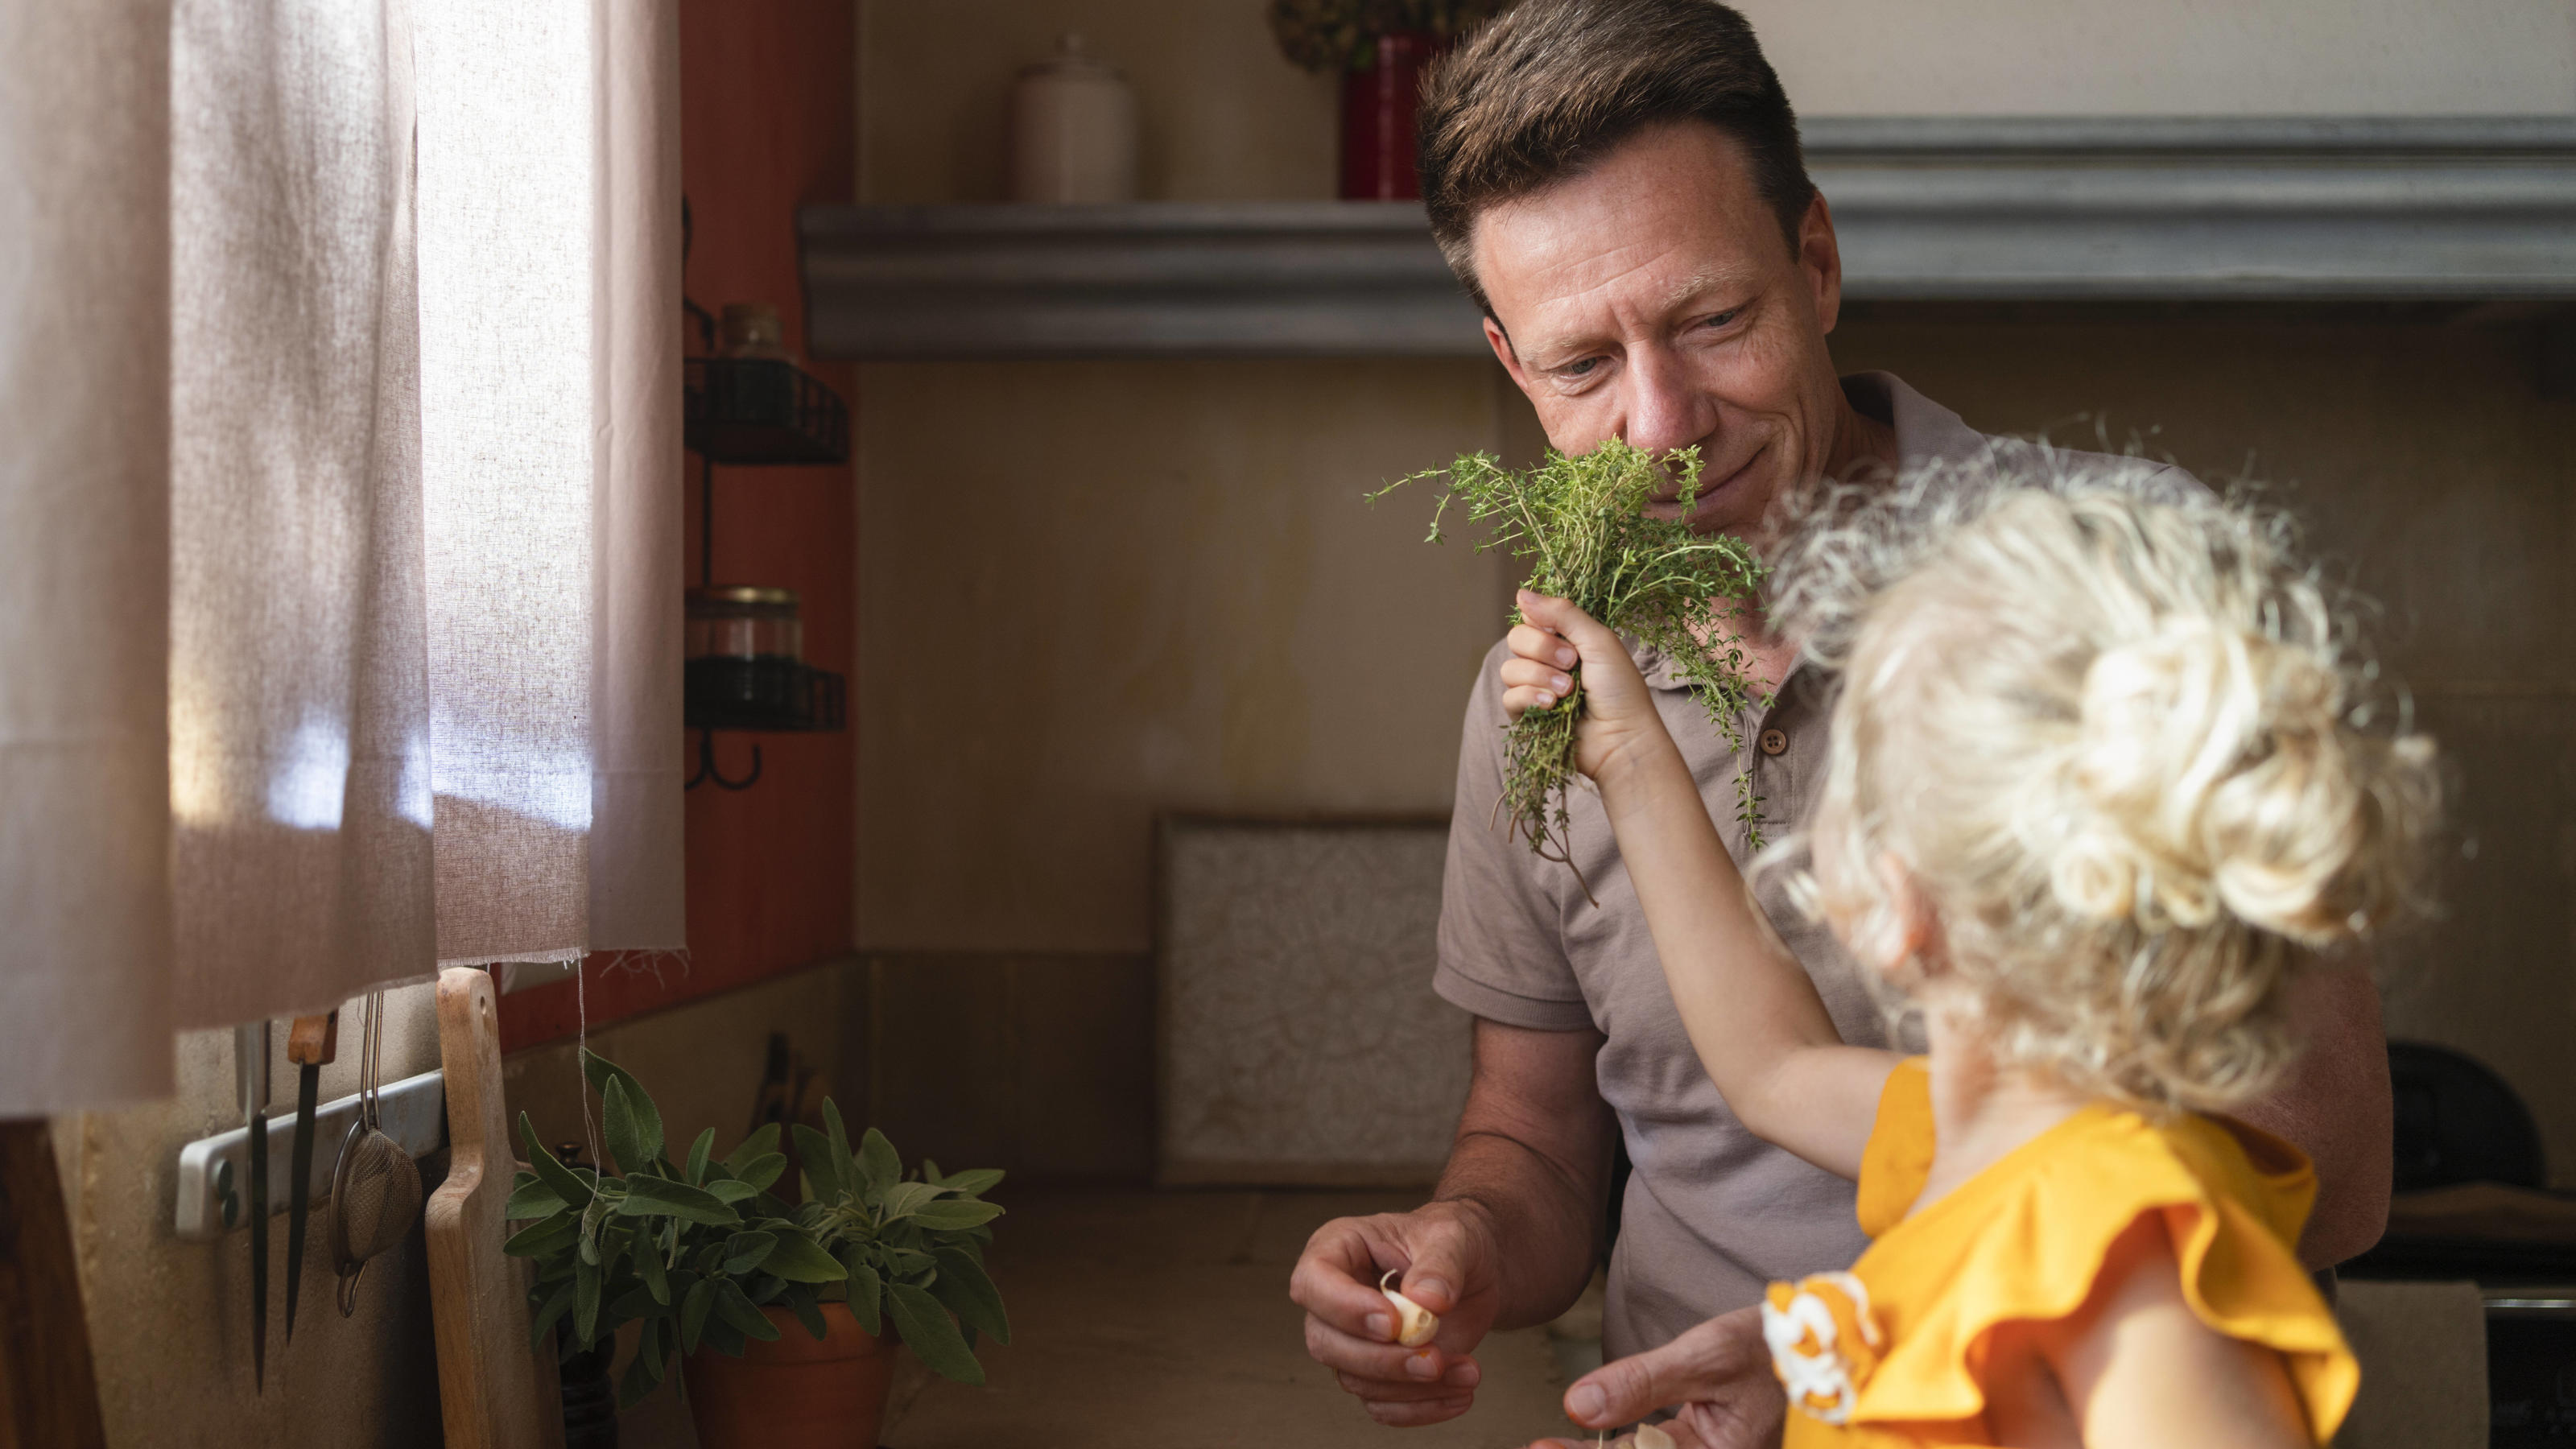  Girl holding thyme in front of father to smell in kitchen model released, Symbolfoto property released, SVKF00570